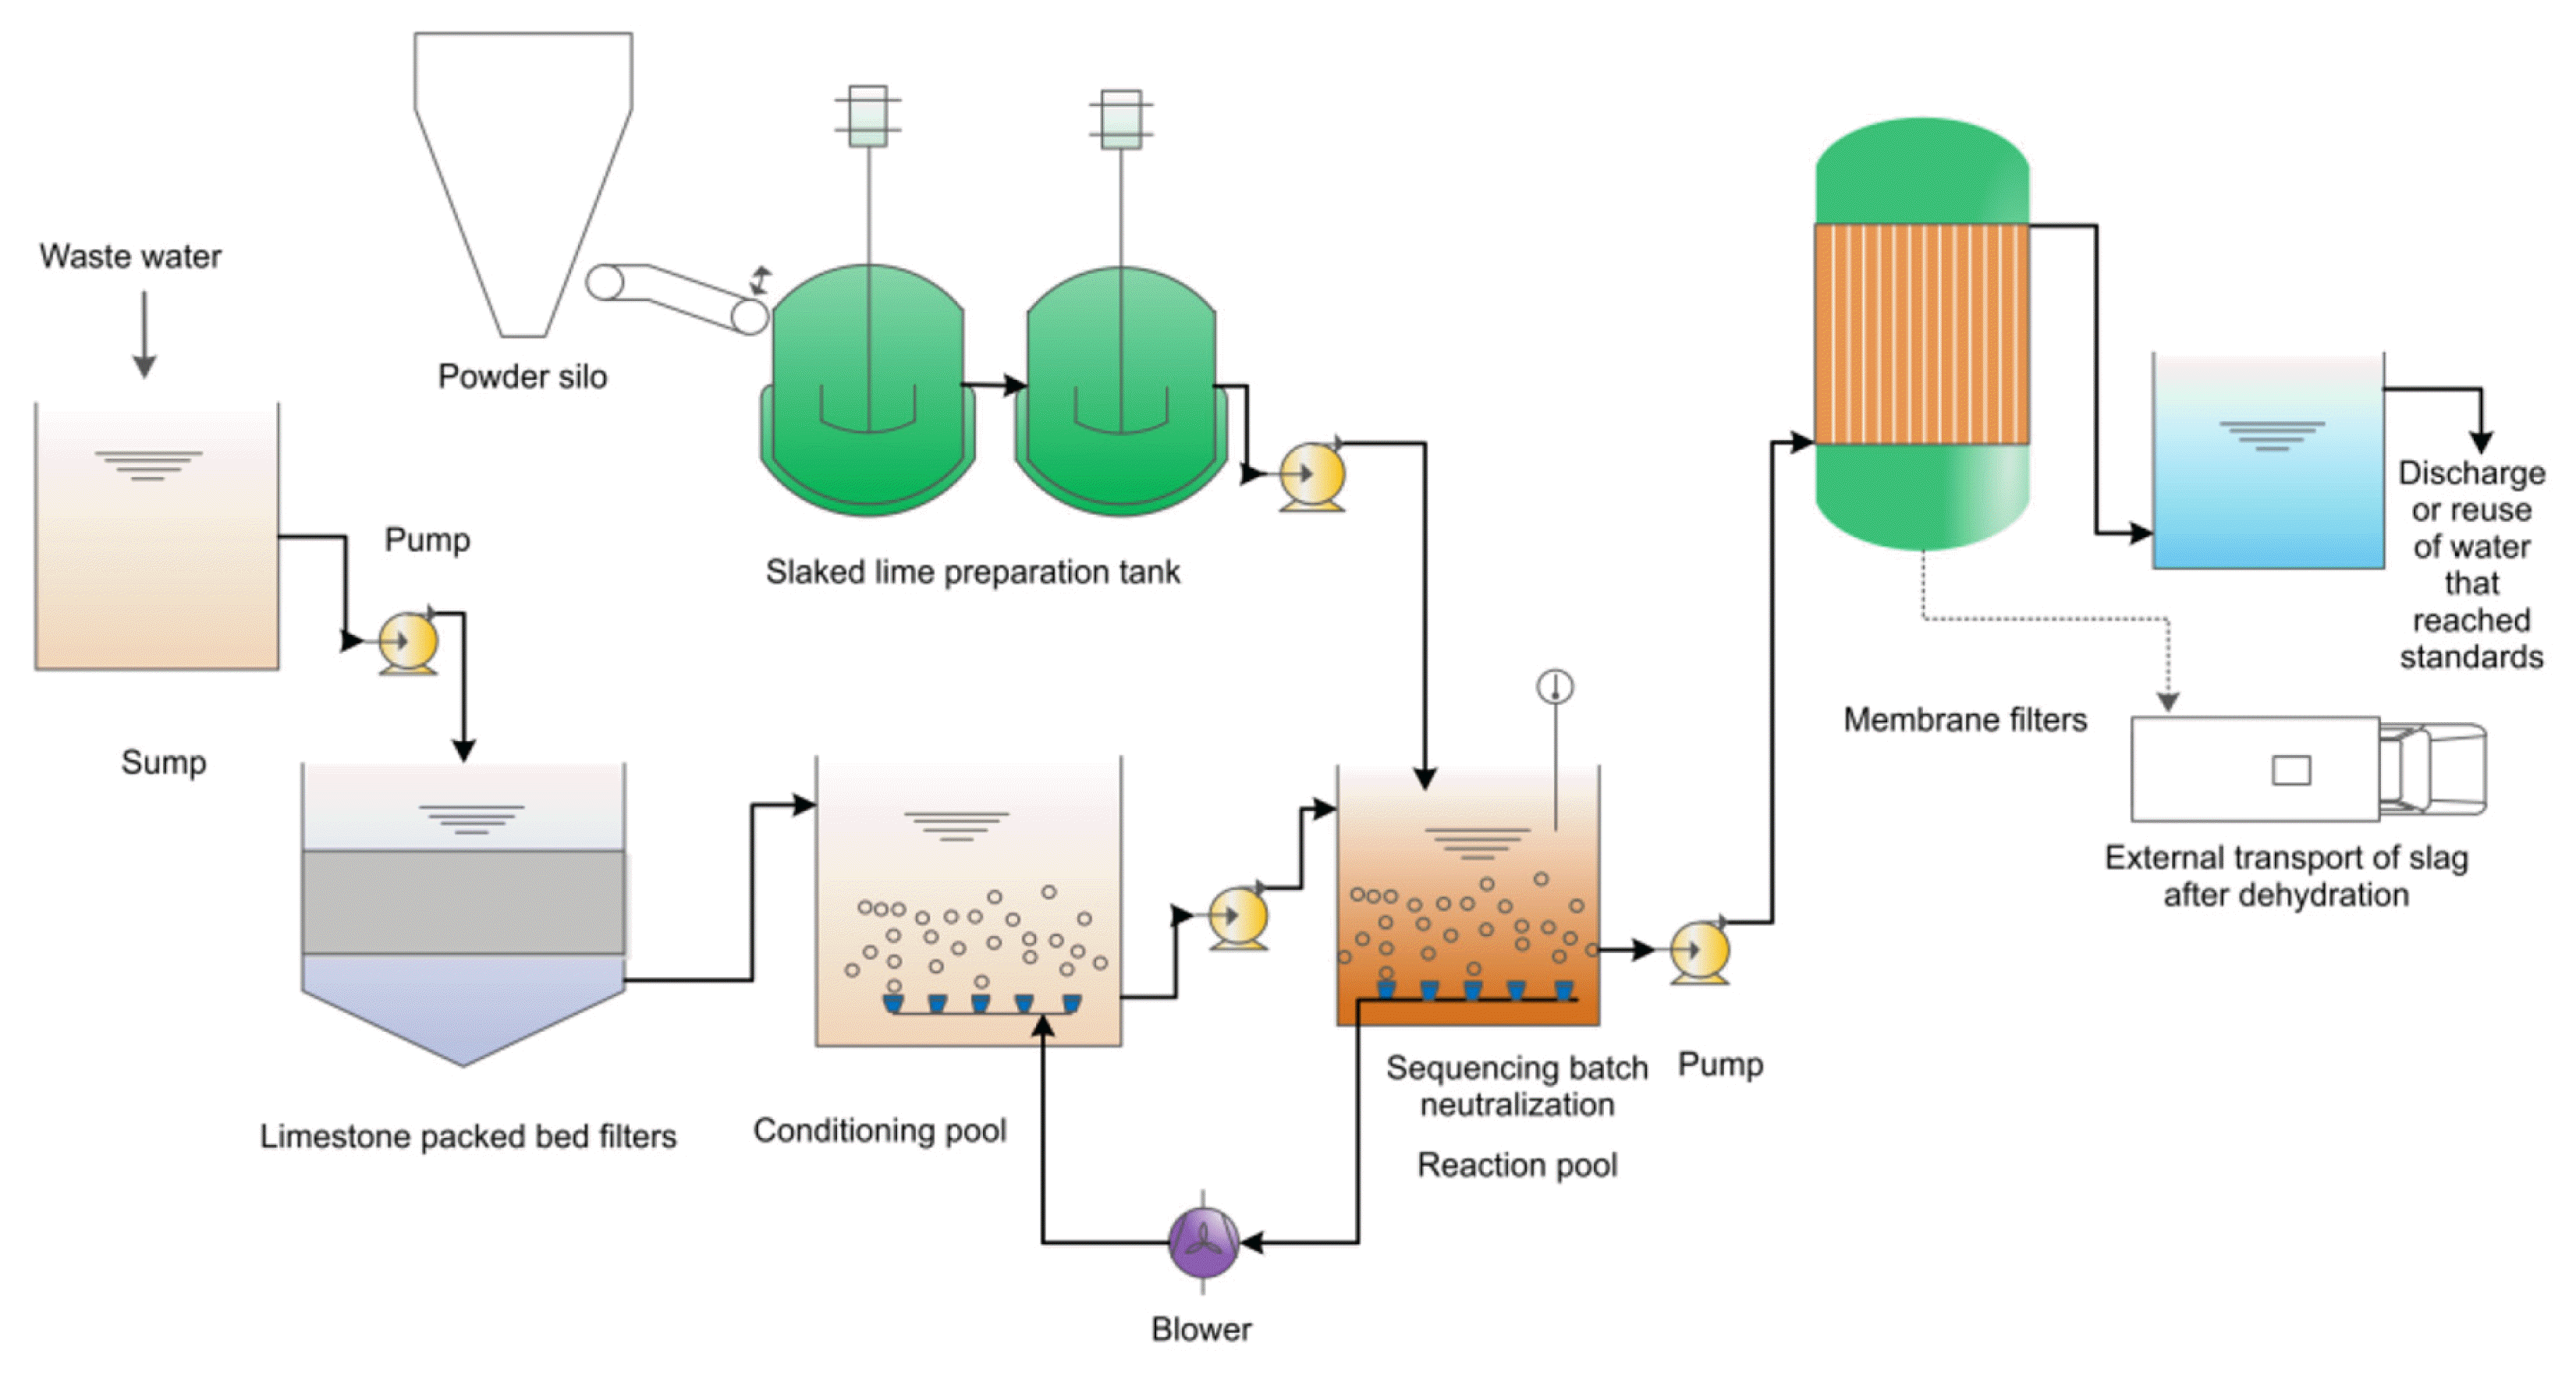 linse Forbipasserende Selvrespekt Purification of pickling wastewater from the steel industry using membrane  filters: Performance and membrane fouling